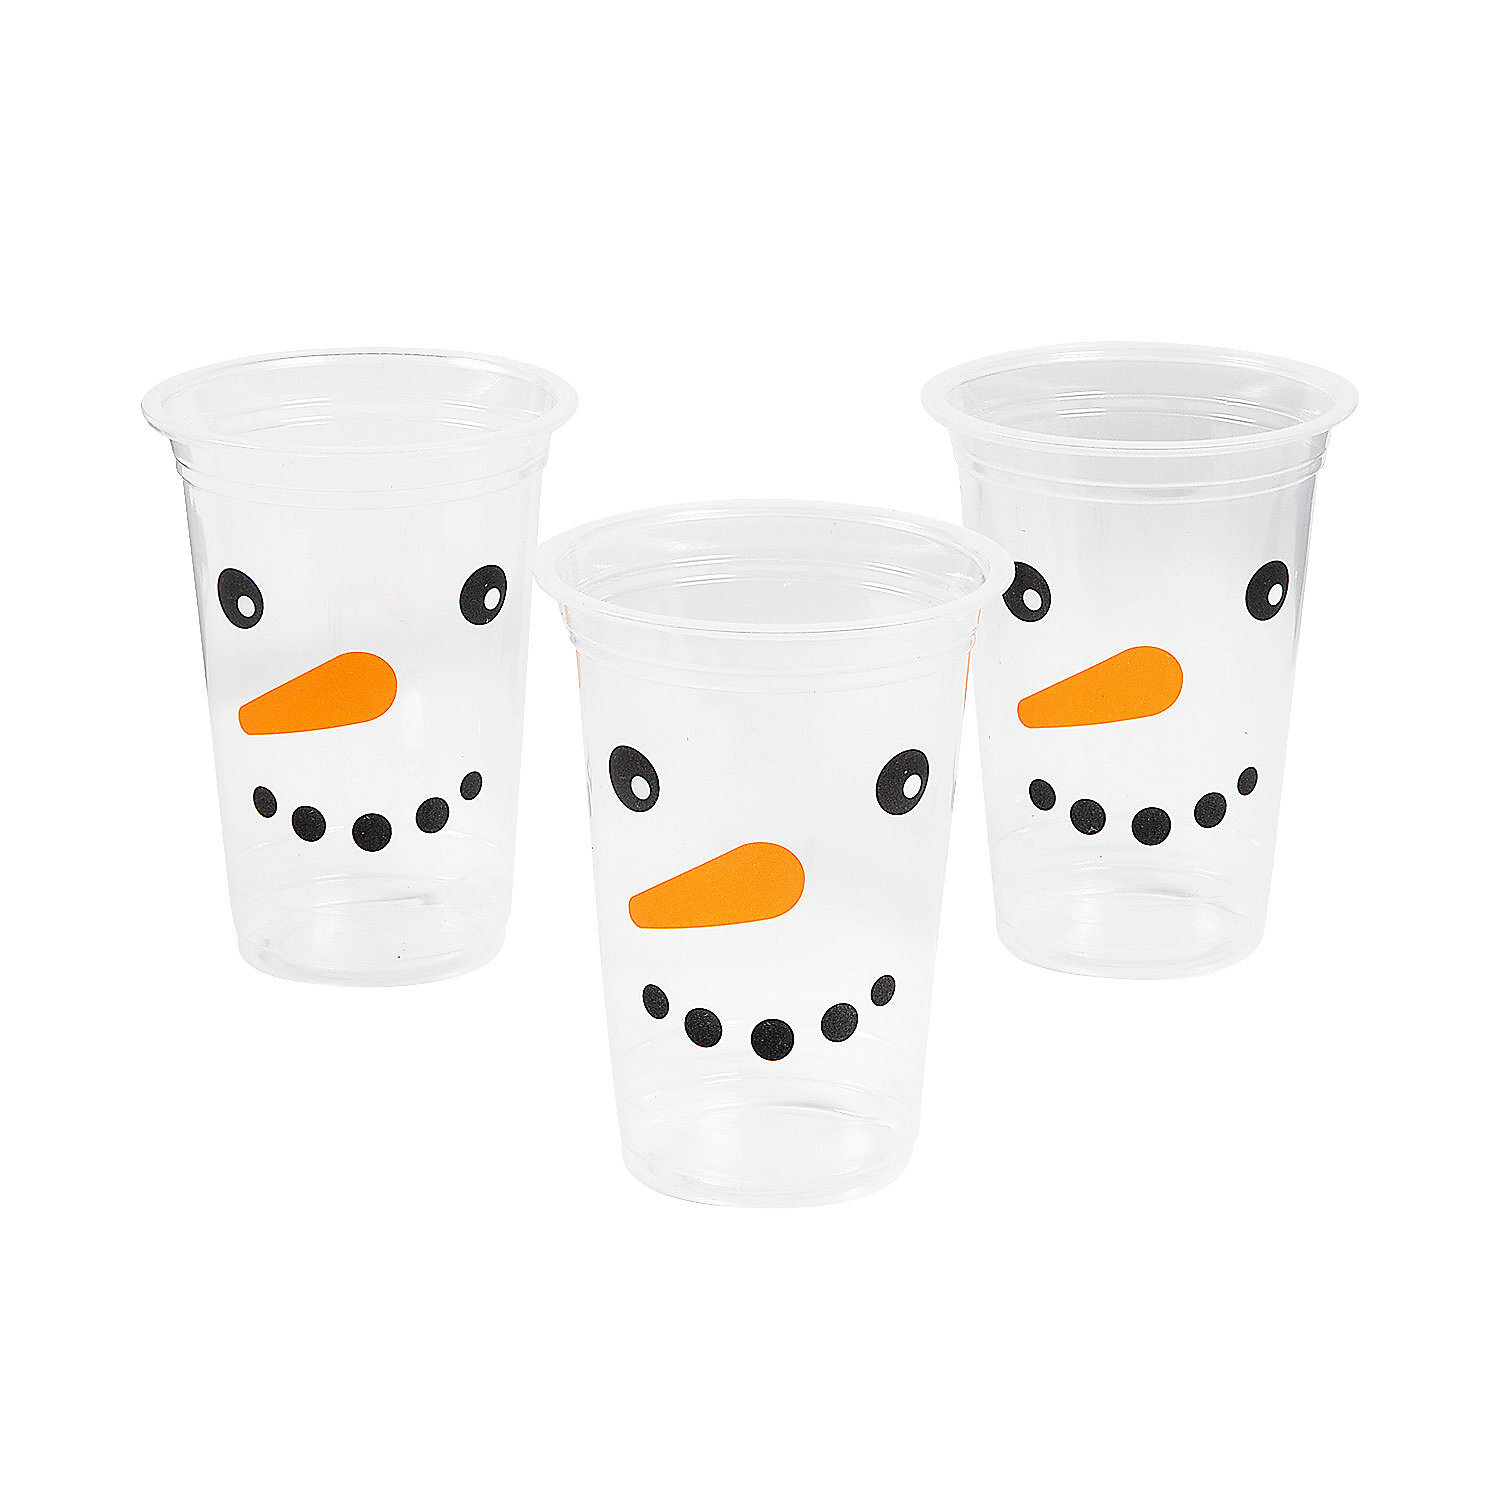 Oriental Trading Company Disposable Plastic Christmas Cups for 50 Guests